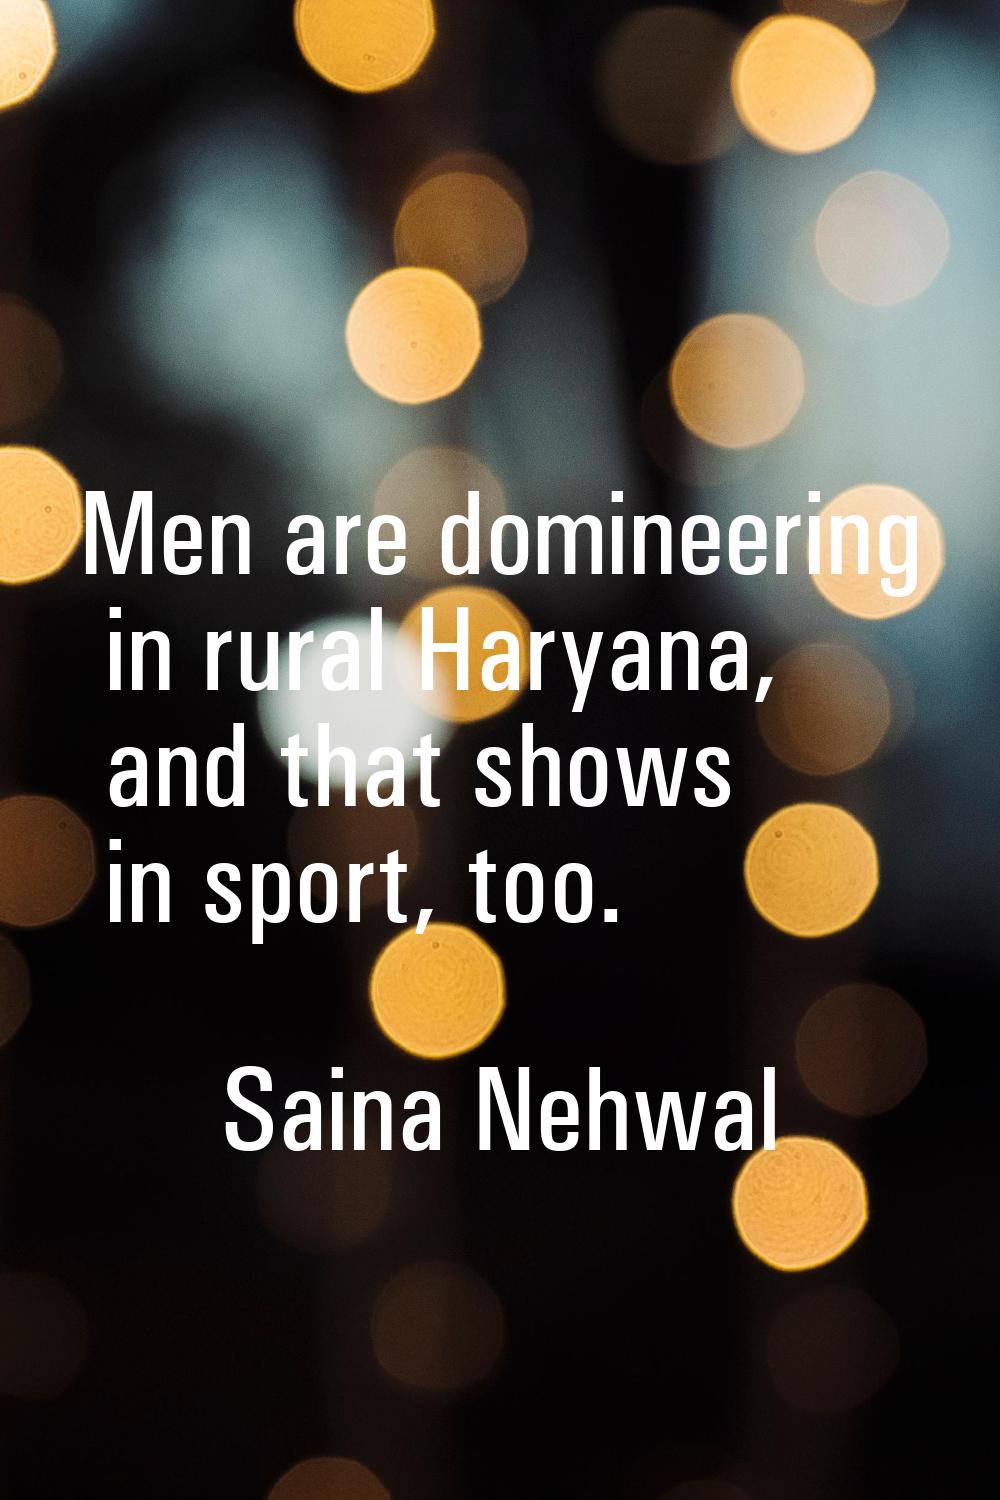 Men are domineering in rural Haryana, and that shows in sport, too.